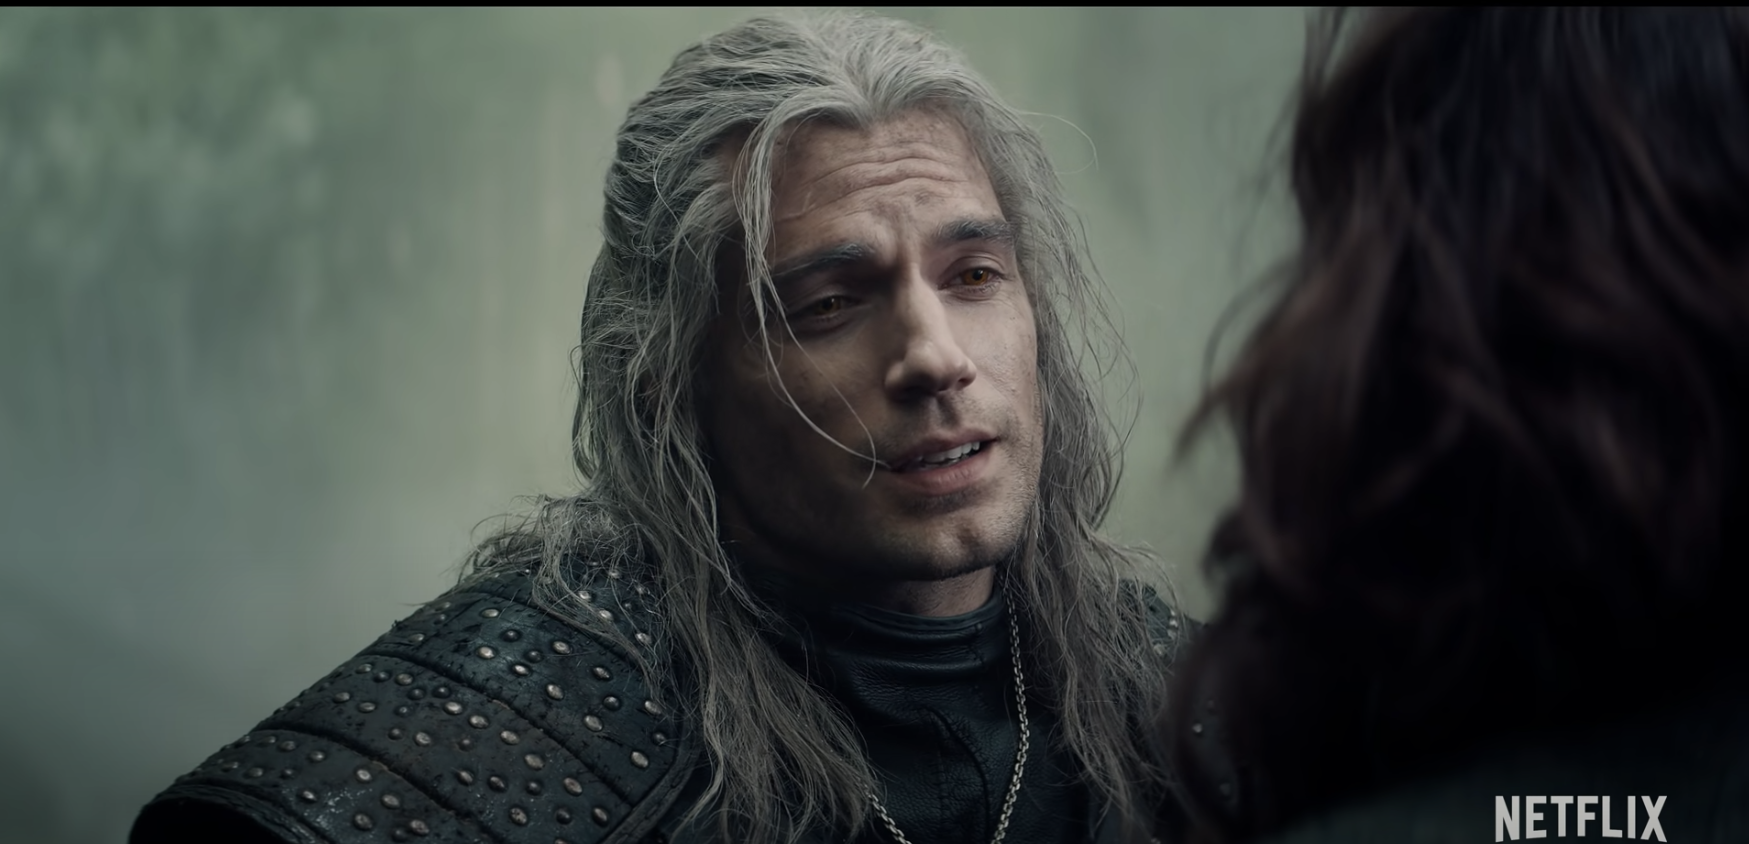 Henry Cavill Name Erased From The Witcher 3, News from Hollywood